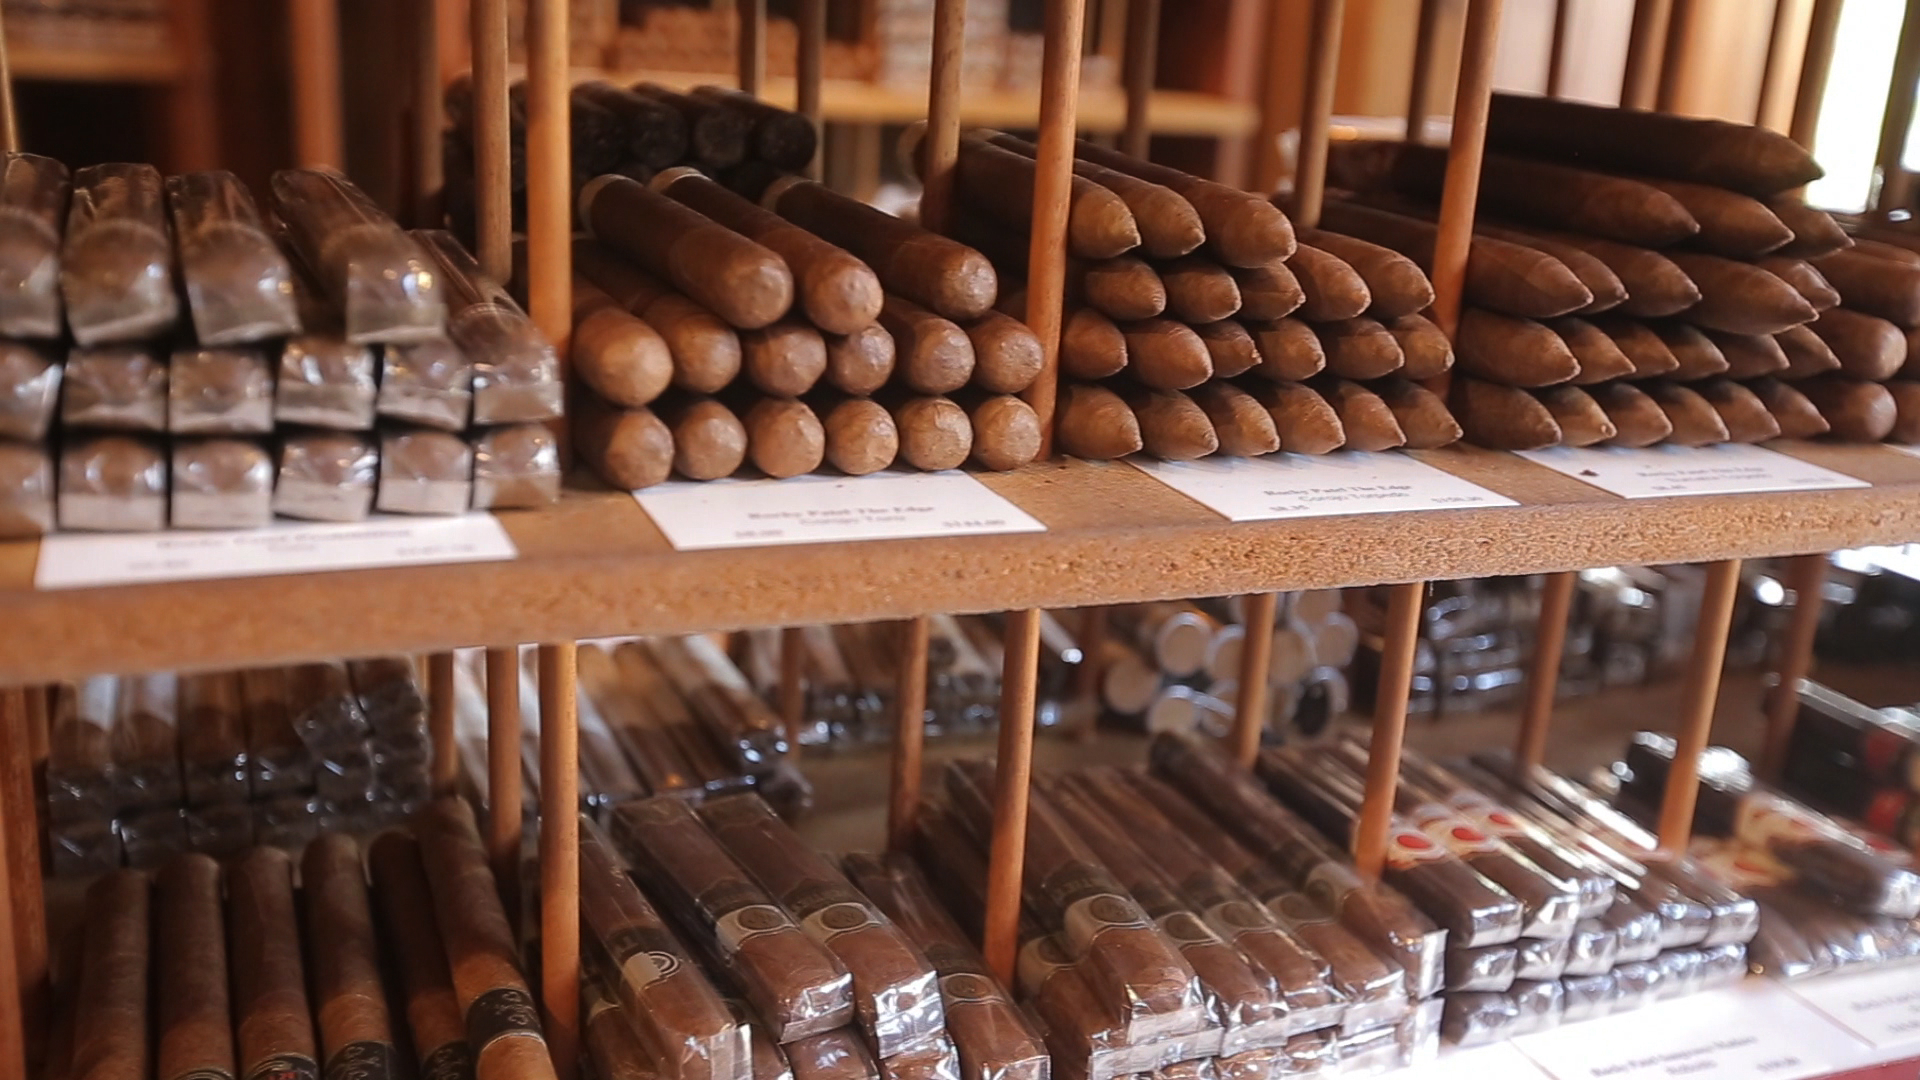 Cigars in the Humidor at the  Tobacco Shop of Ridgewood.jpg